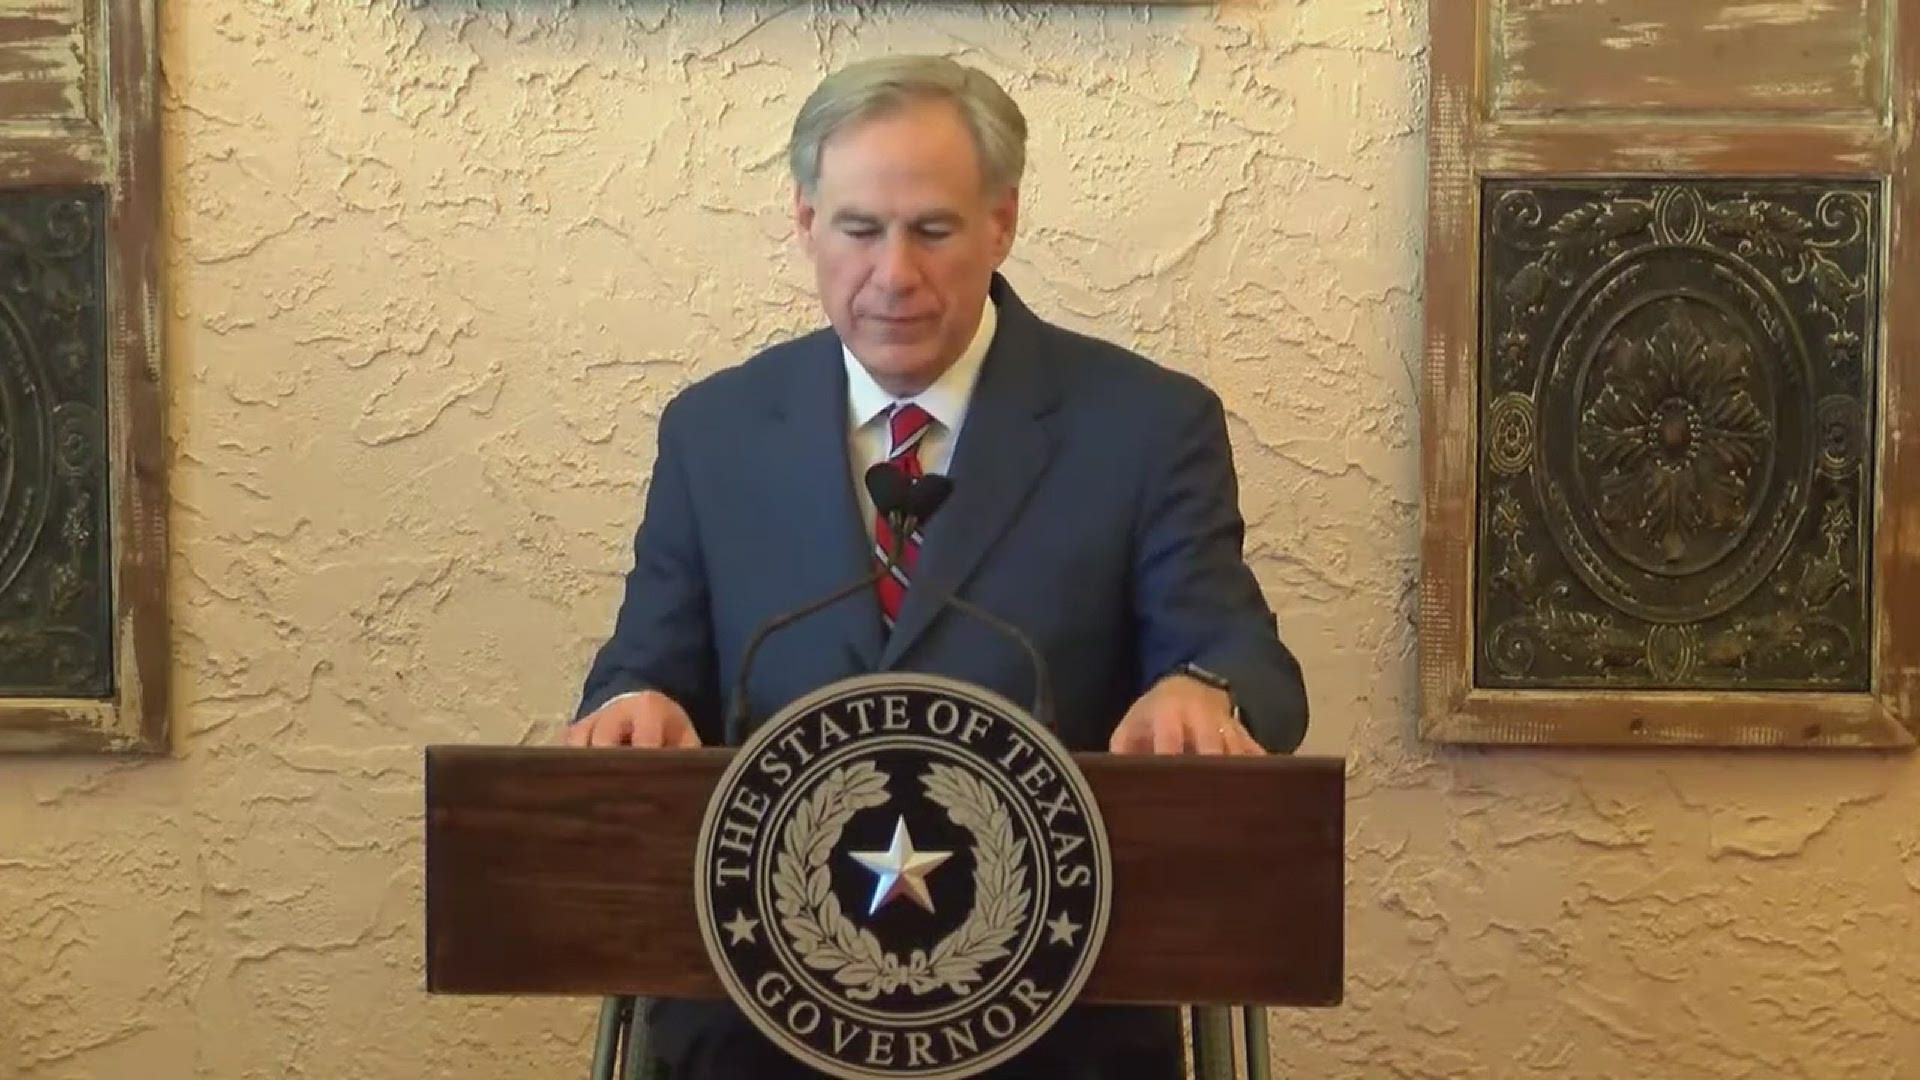 Gov. Abbott spoke in Lubbock on Tuesday where he issued a new executive order that ended the statewide mask mandate and opened businesses to 100% capacity